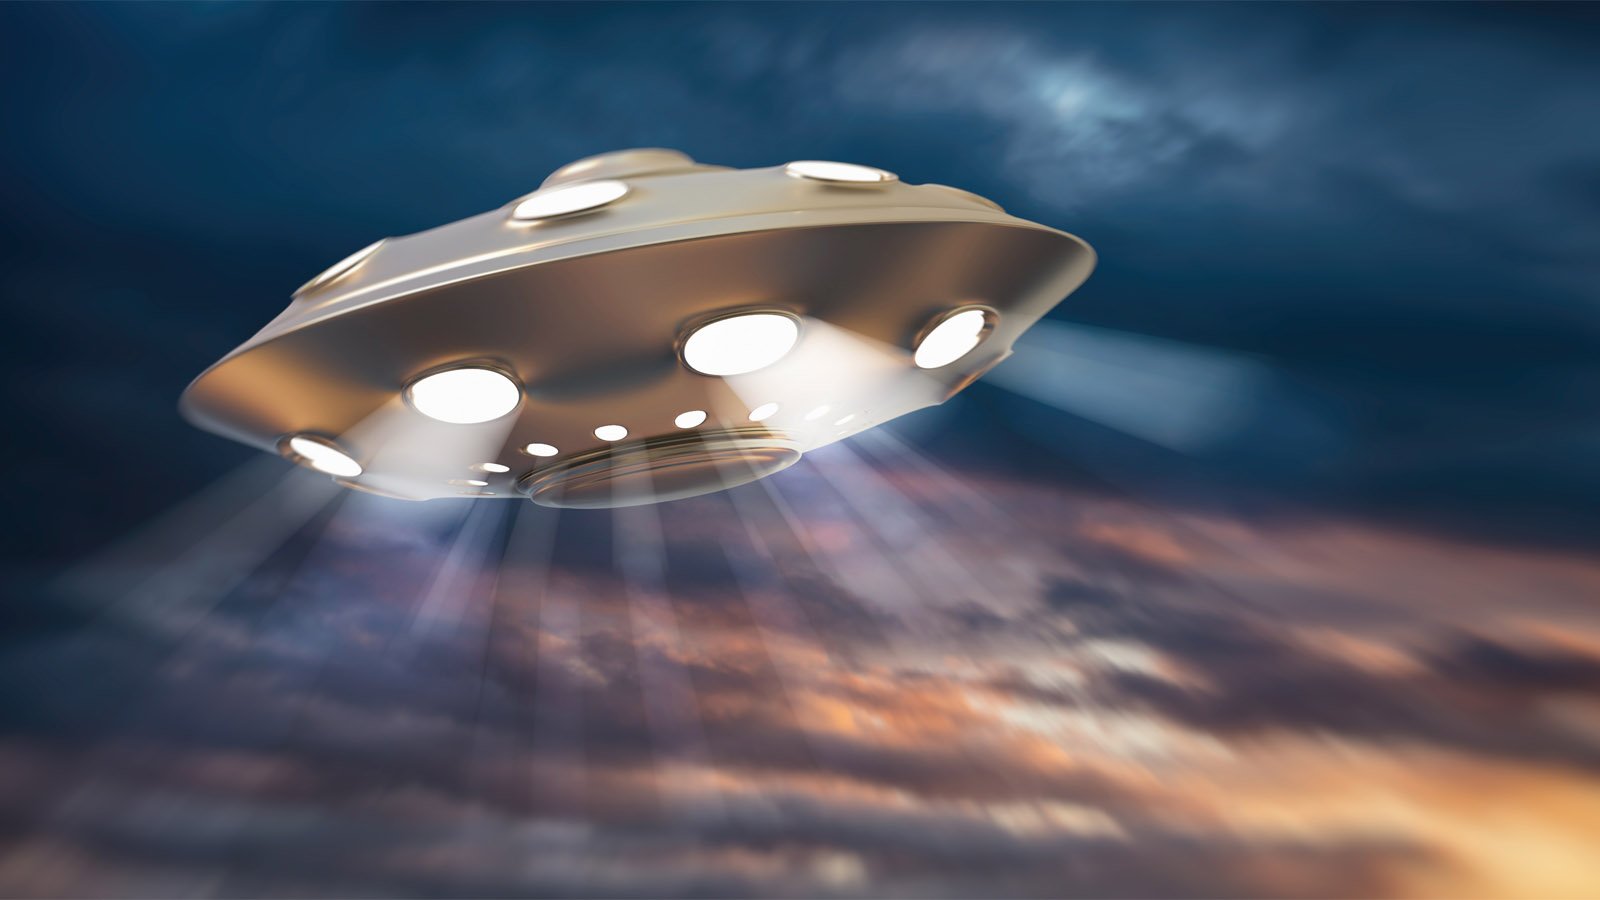 Oil rig worker captures UFOs with proof of alien base underwater - cover